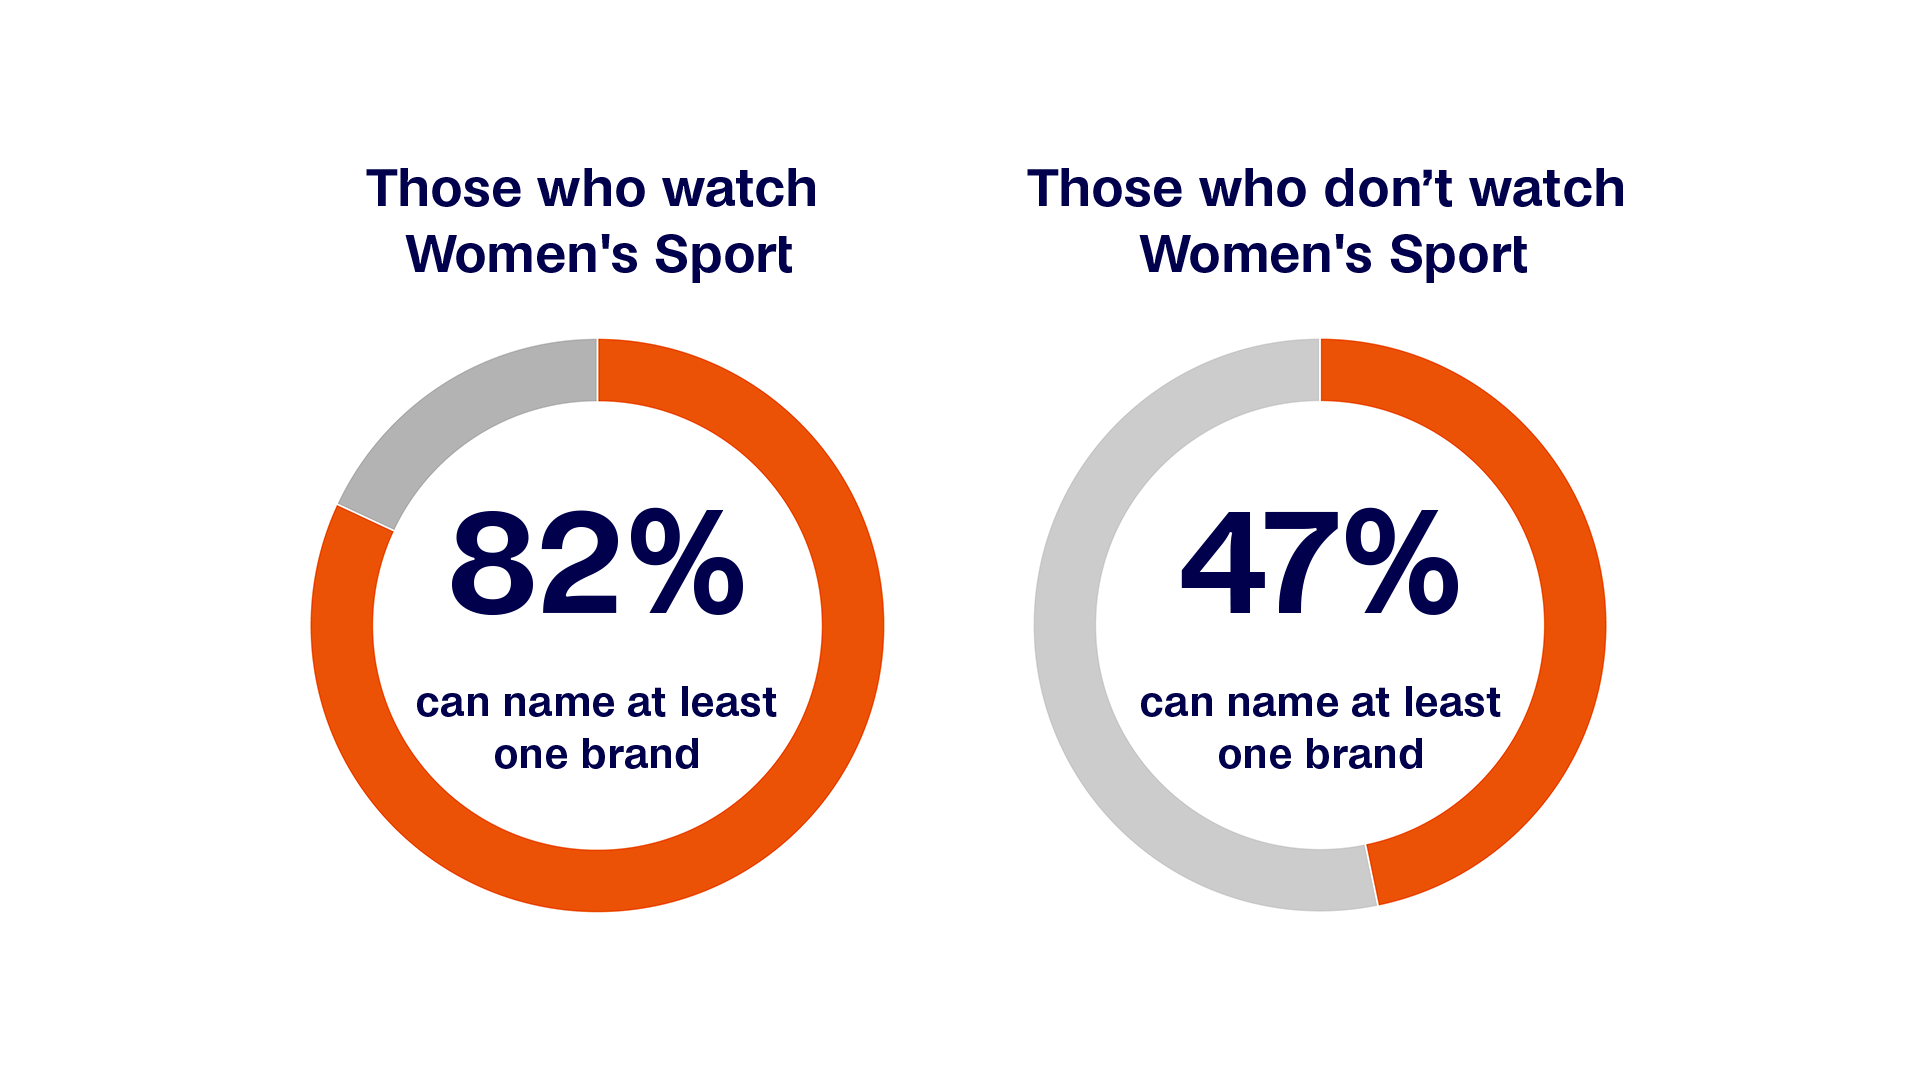 82% of those who watch Women's Sport can name at least one sponsor brand compared to only 47% who don't watch Women's Sport.